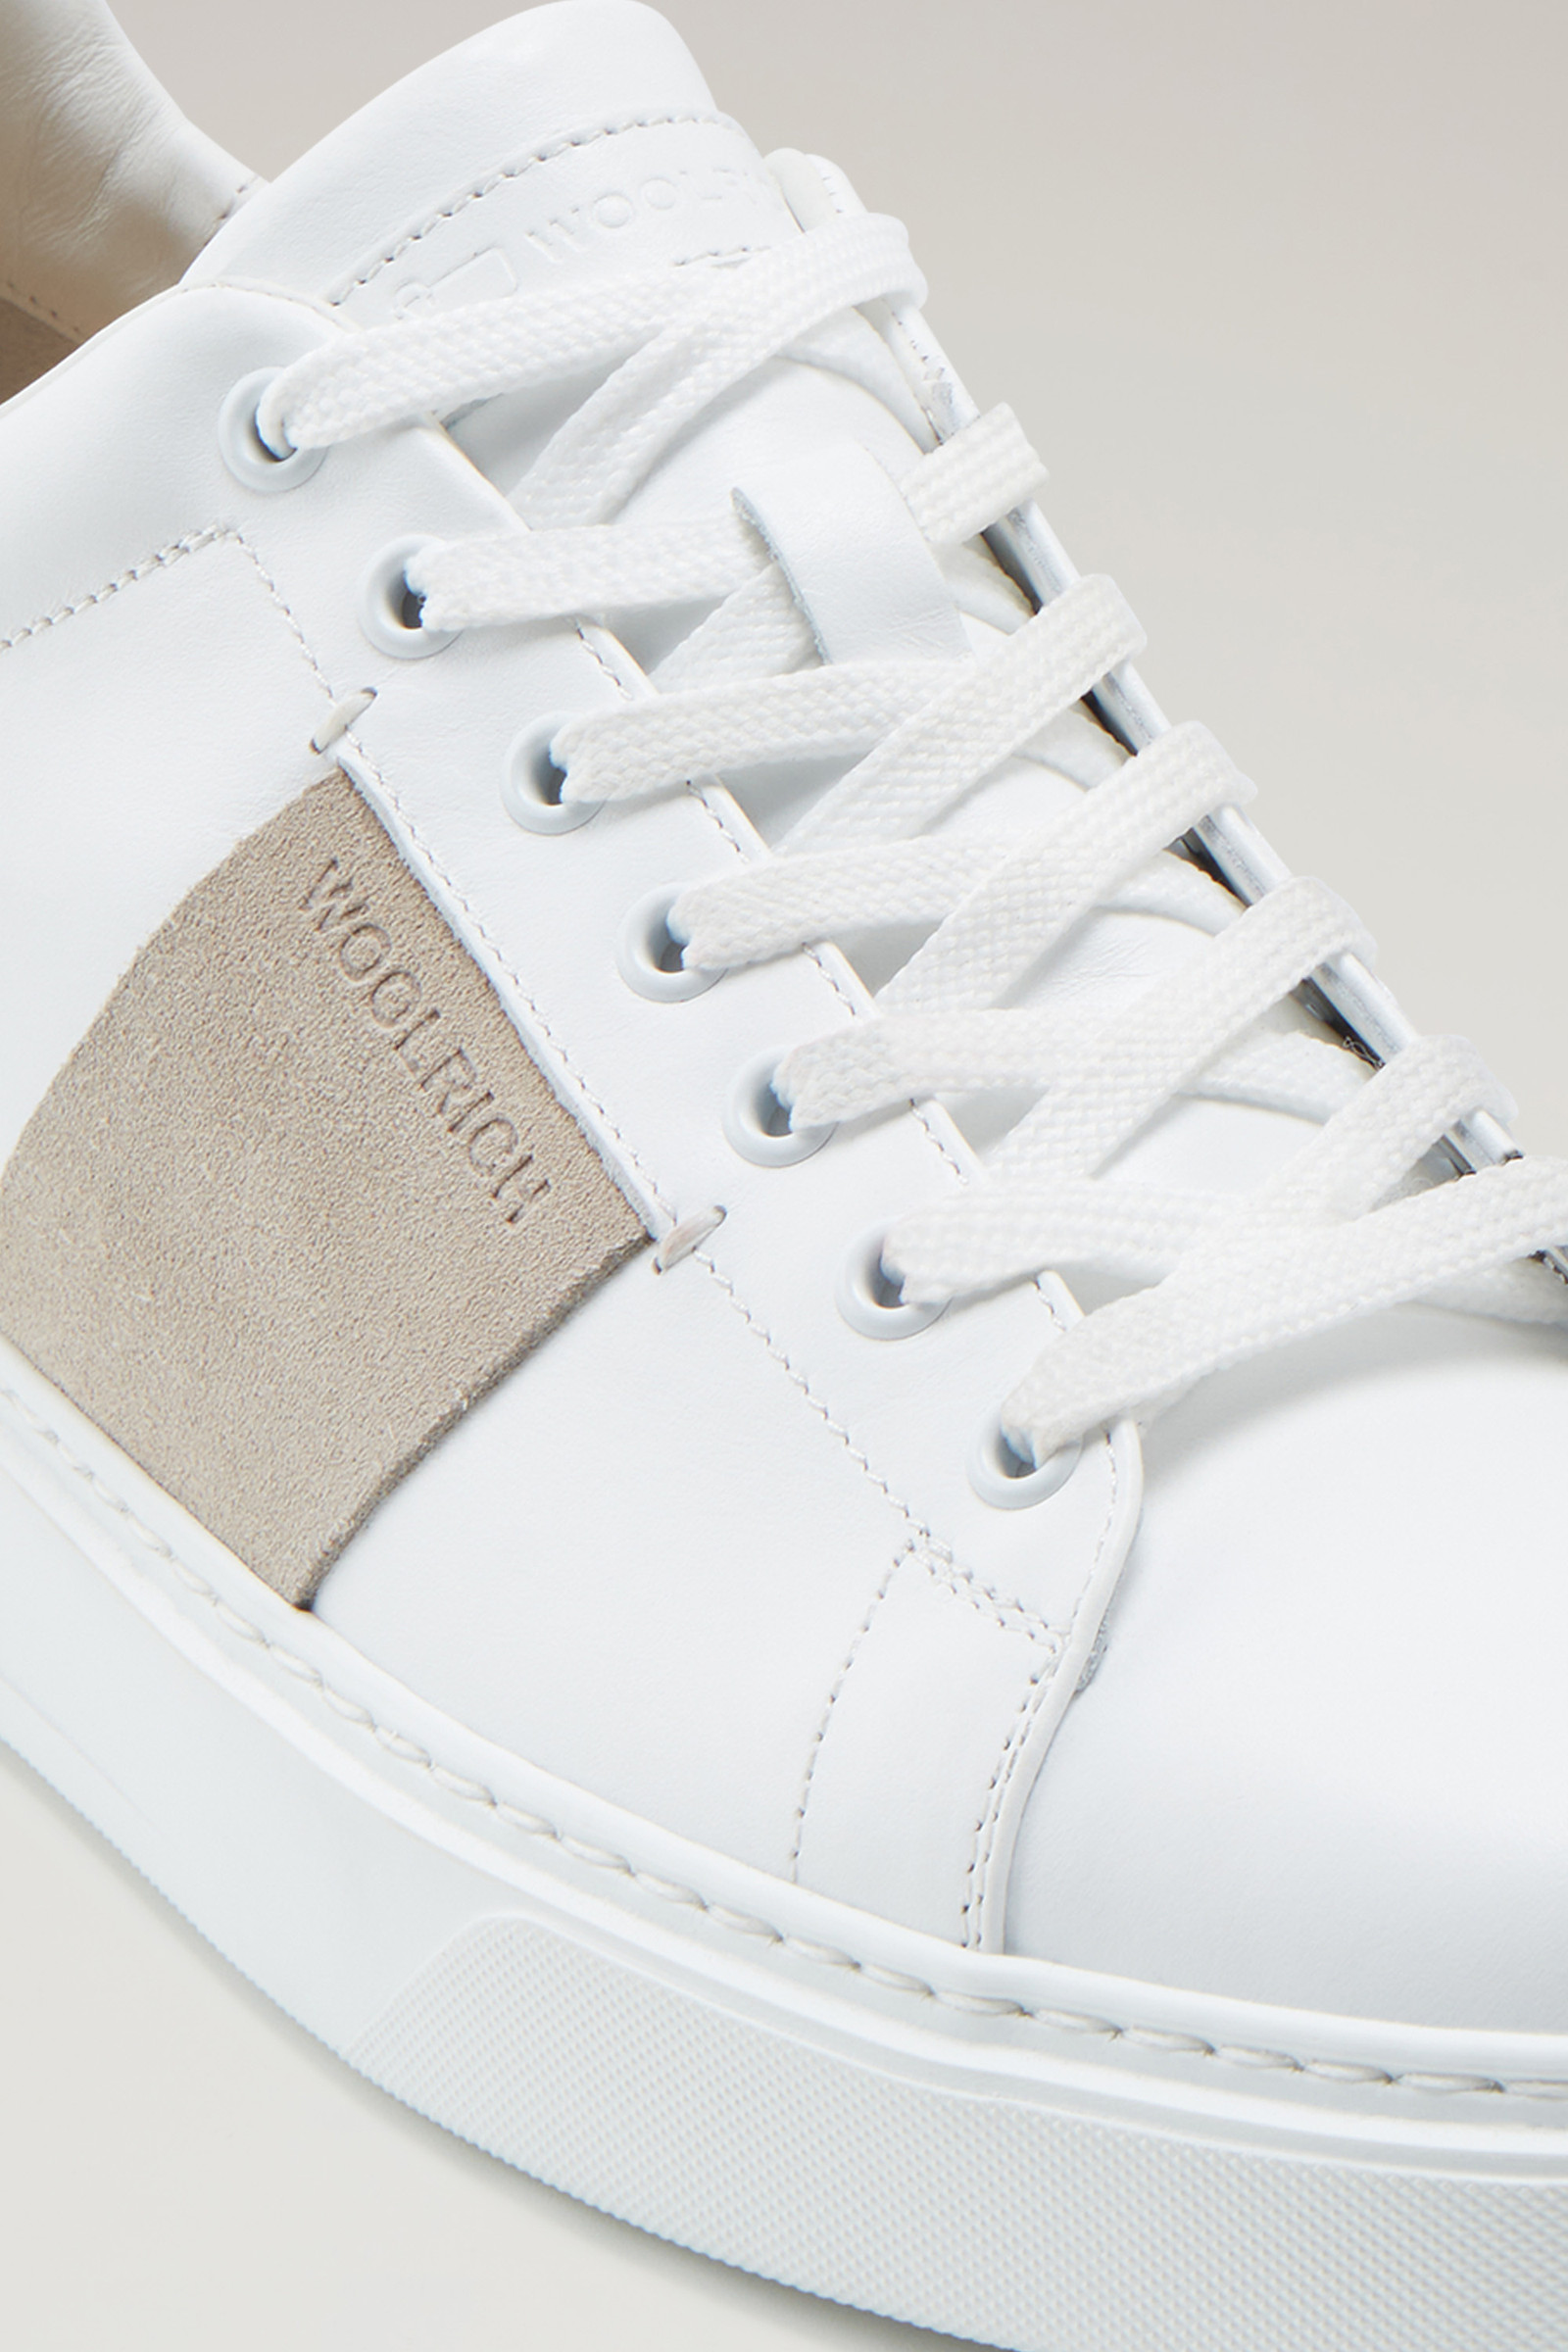 WOOLRICH - Leather Sneakers